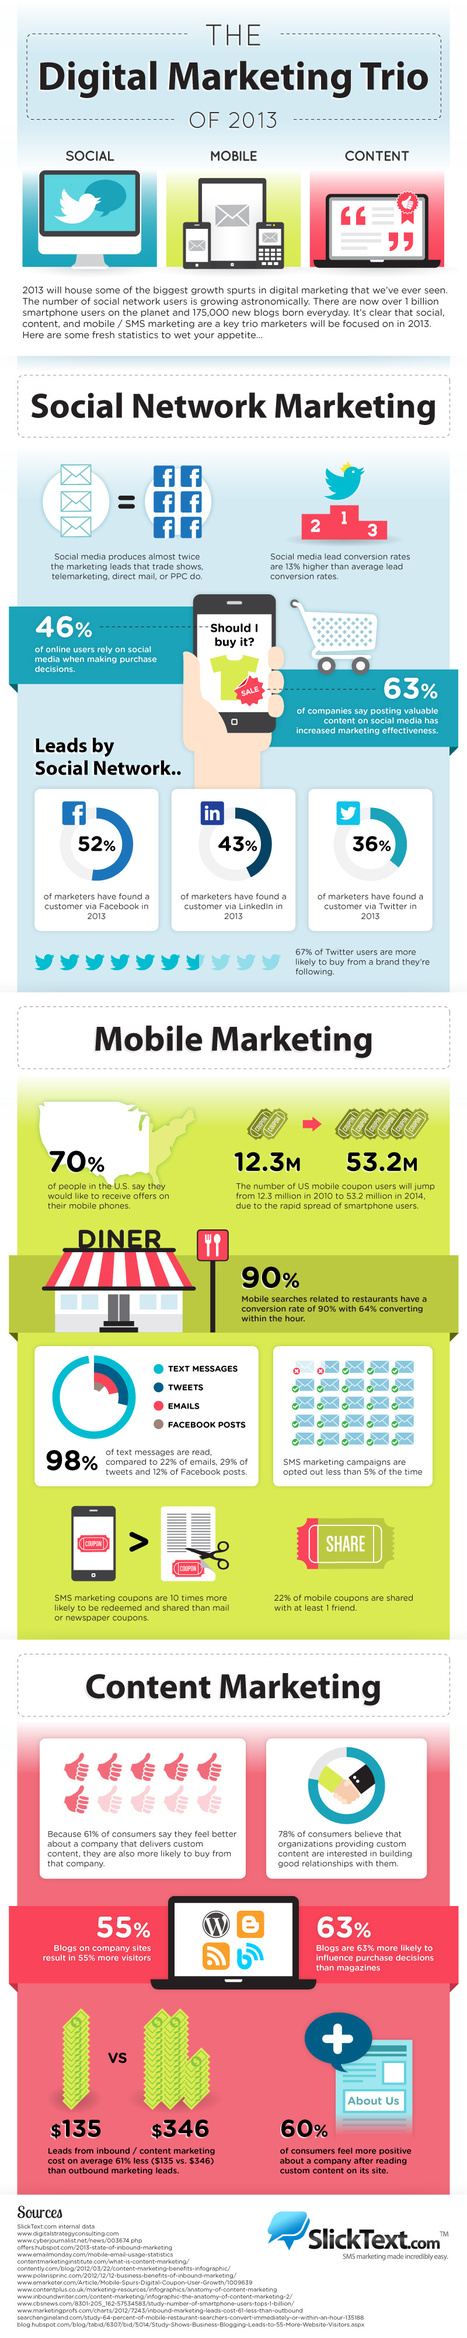 The Digital Marketing Trio Of 2013 [Infographic] | Latest Social Media News | Scoop.it